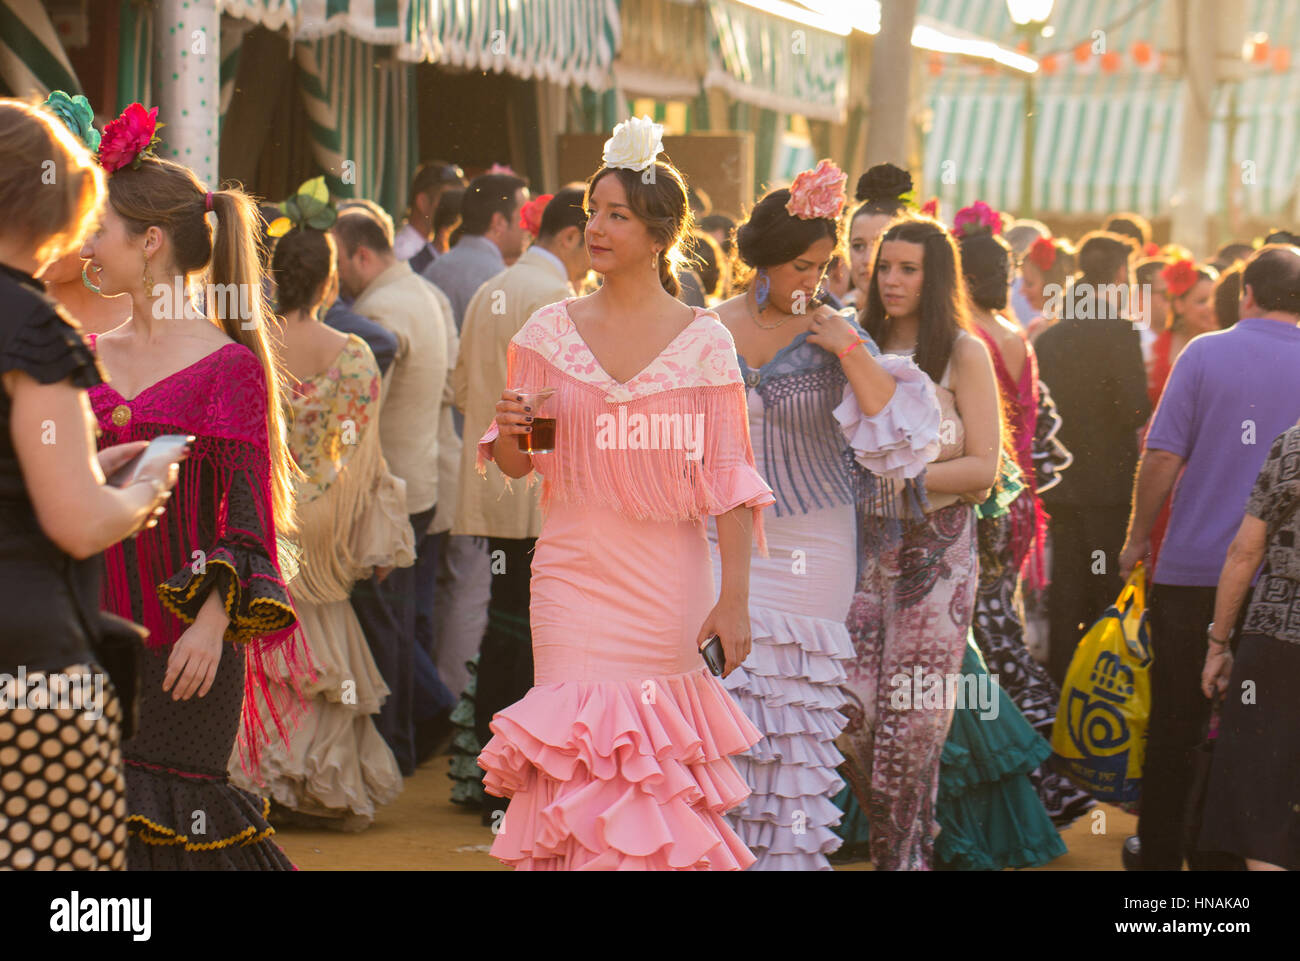 SEVILLE, SPAIN - APR, 25: women dressed in traditional costumes at the Seville's April Fair on April, 25, 2014 in Seville, Spain Stock Photo